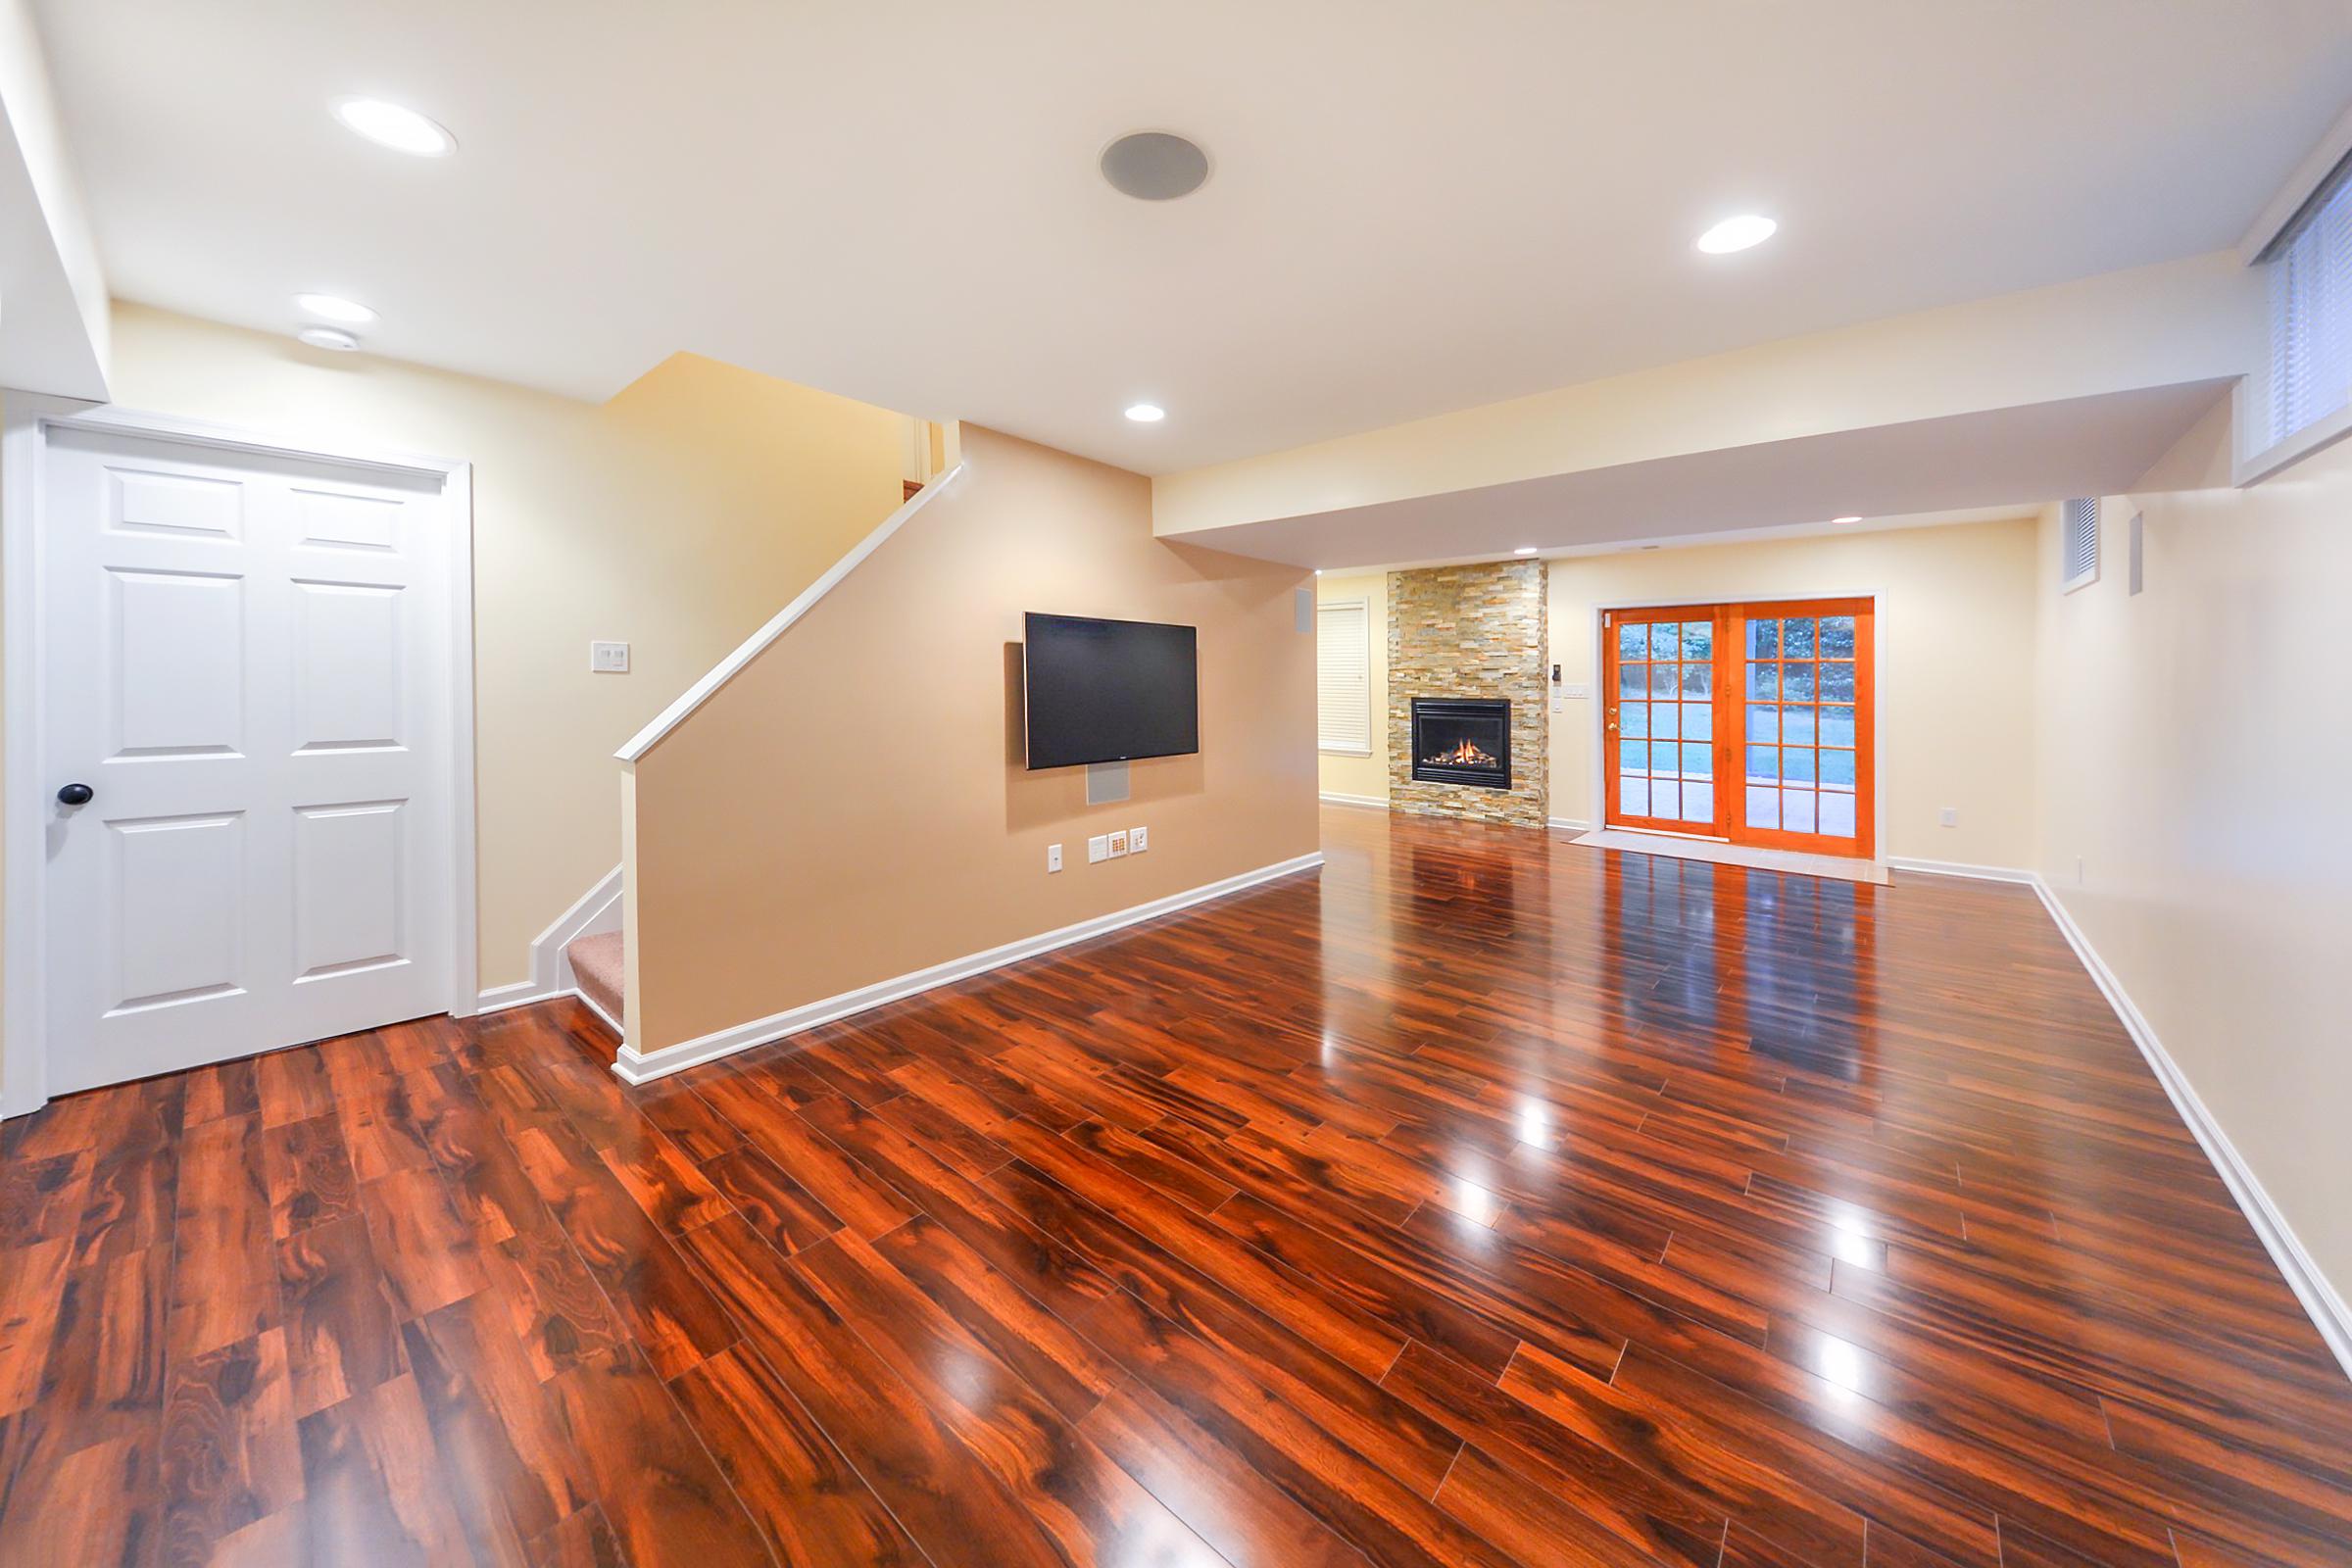 Basement Remodeling Cost Guide Updated With Prices In 2018